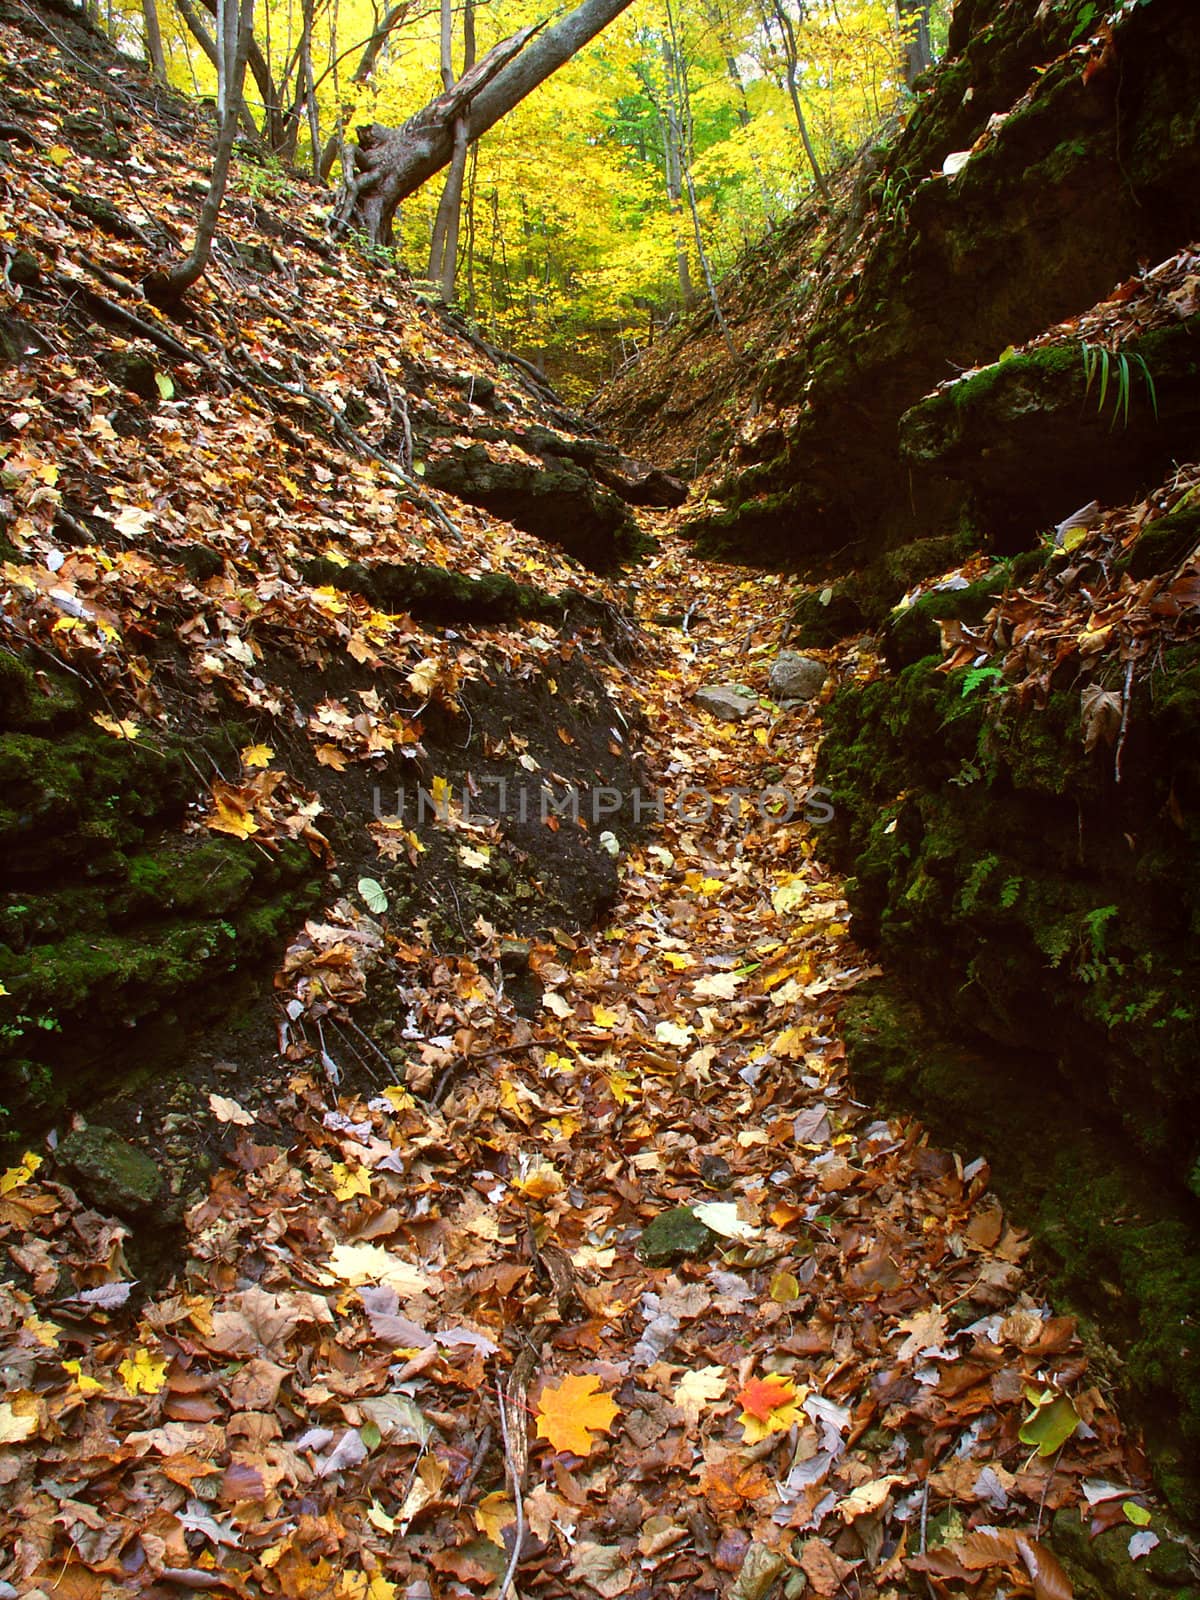 A deep gorge fills with falling leaves at Kishwaukee Gorge Forest Preserve in Illinois.